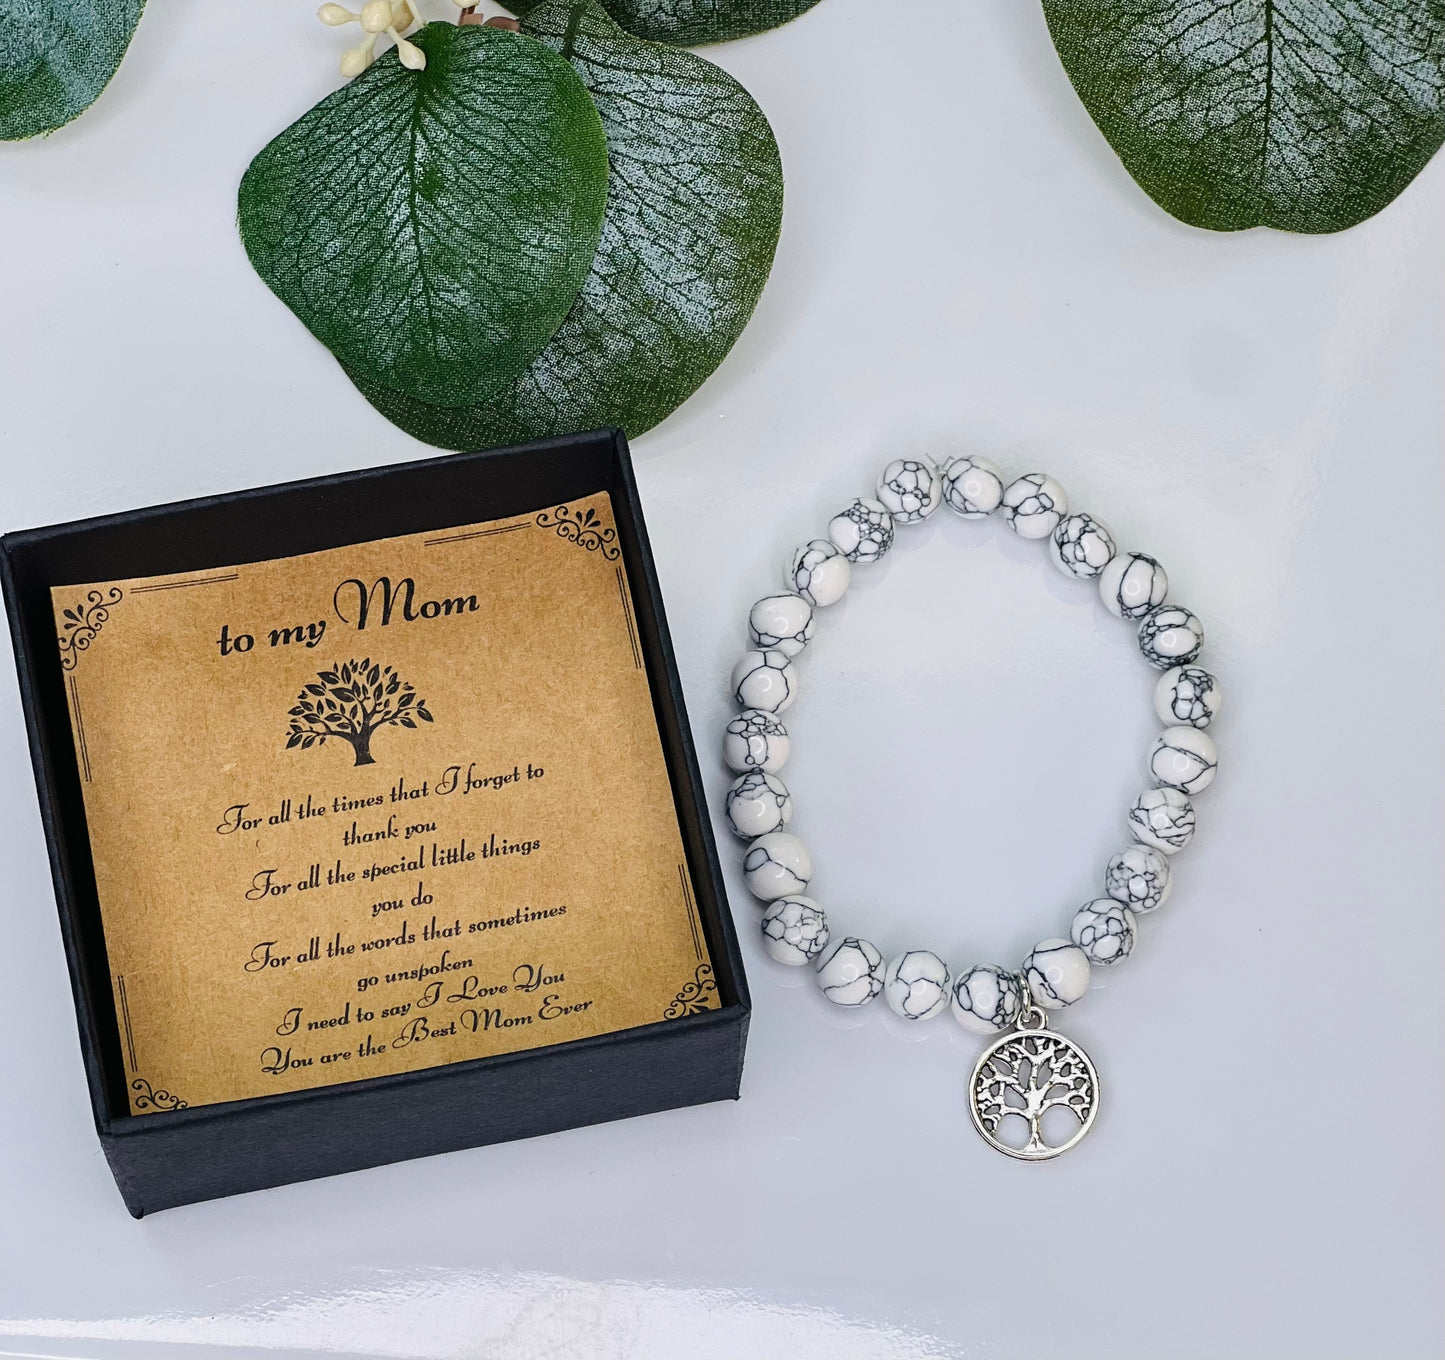 "To My Mom" Natural Stone Beaded Bracelet with Pendant and card